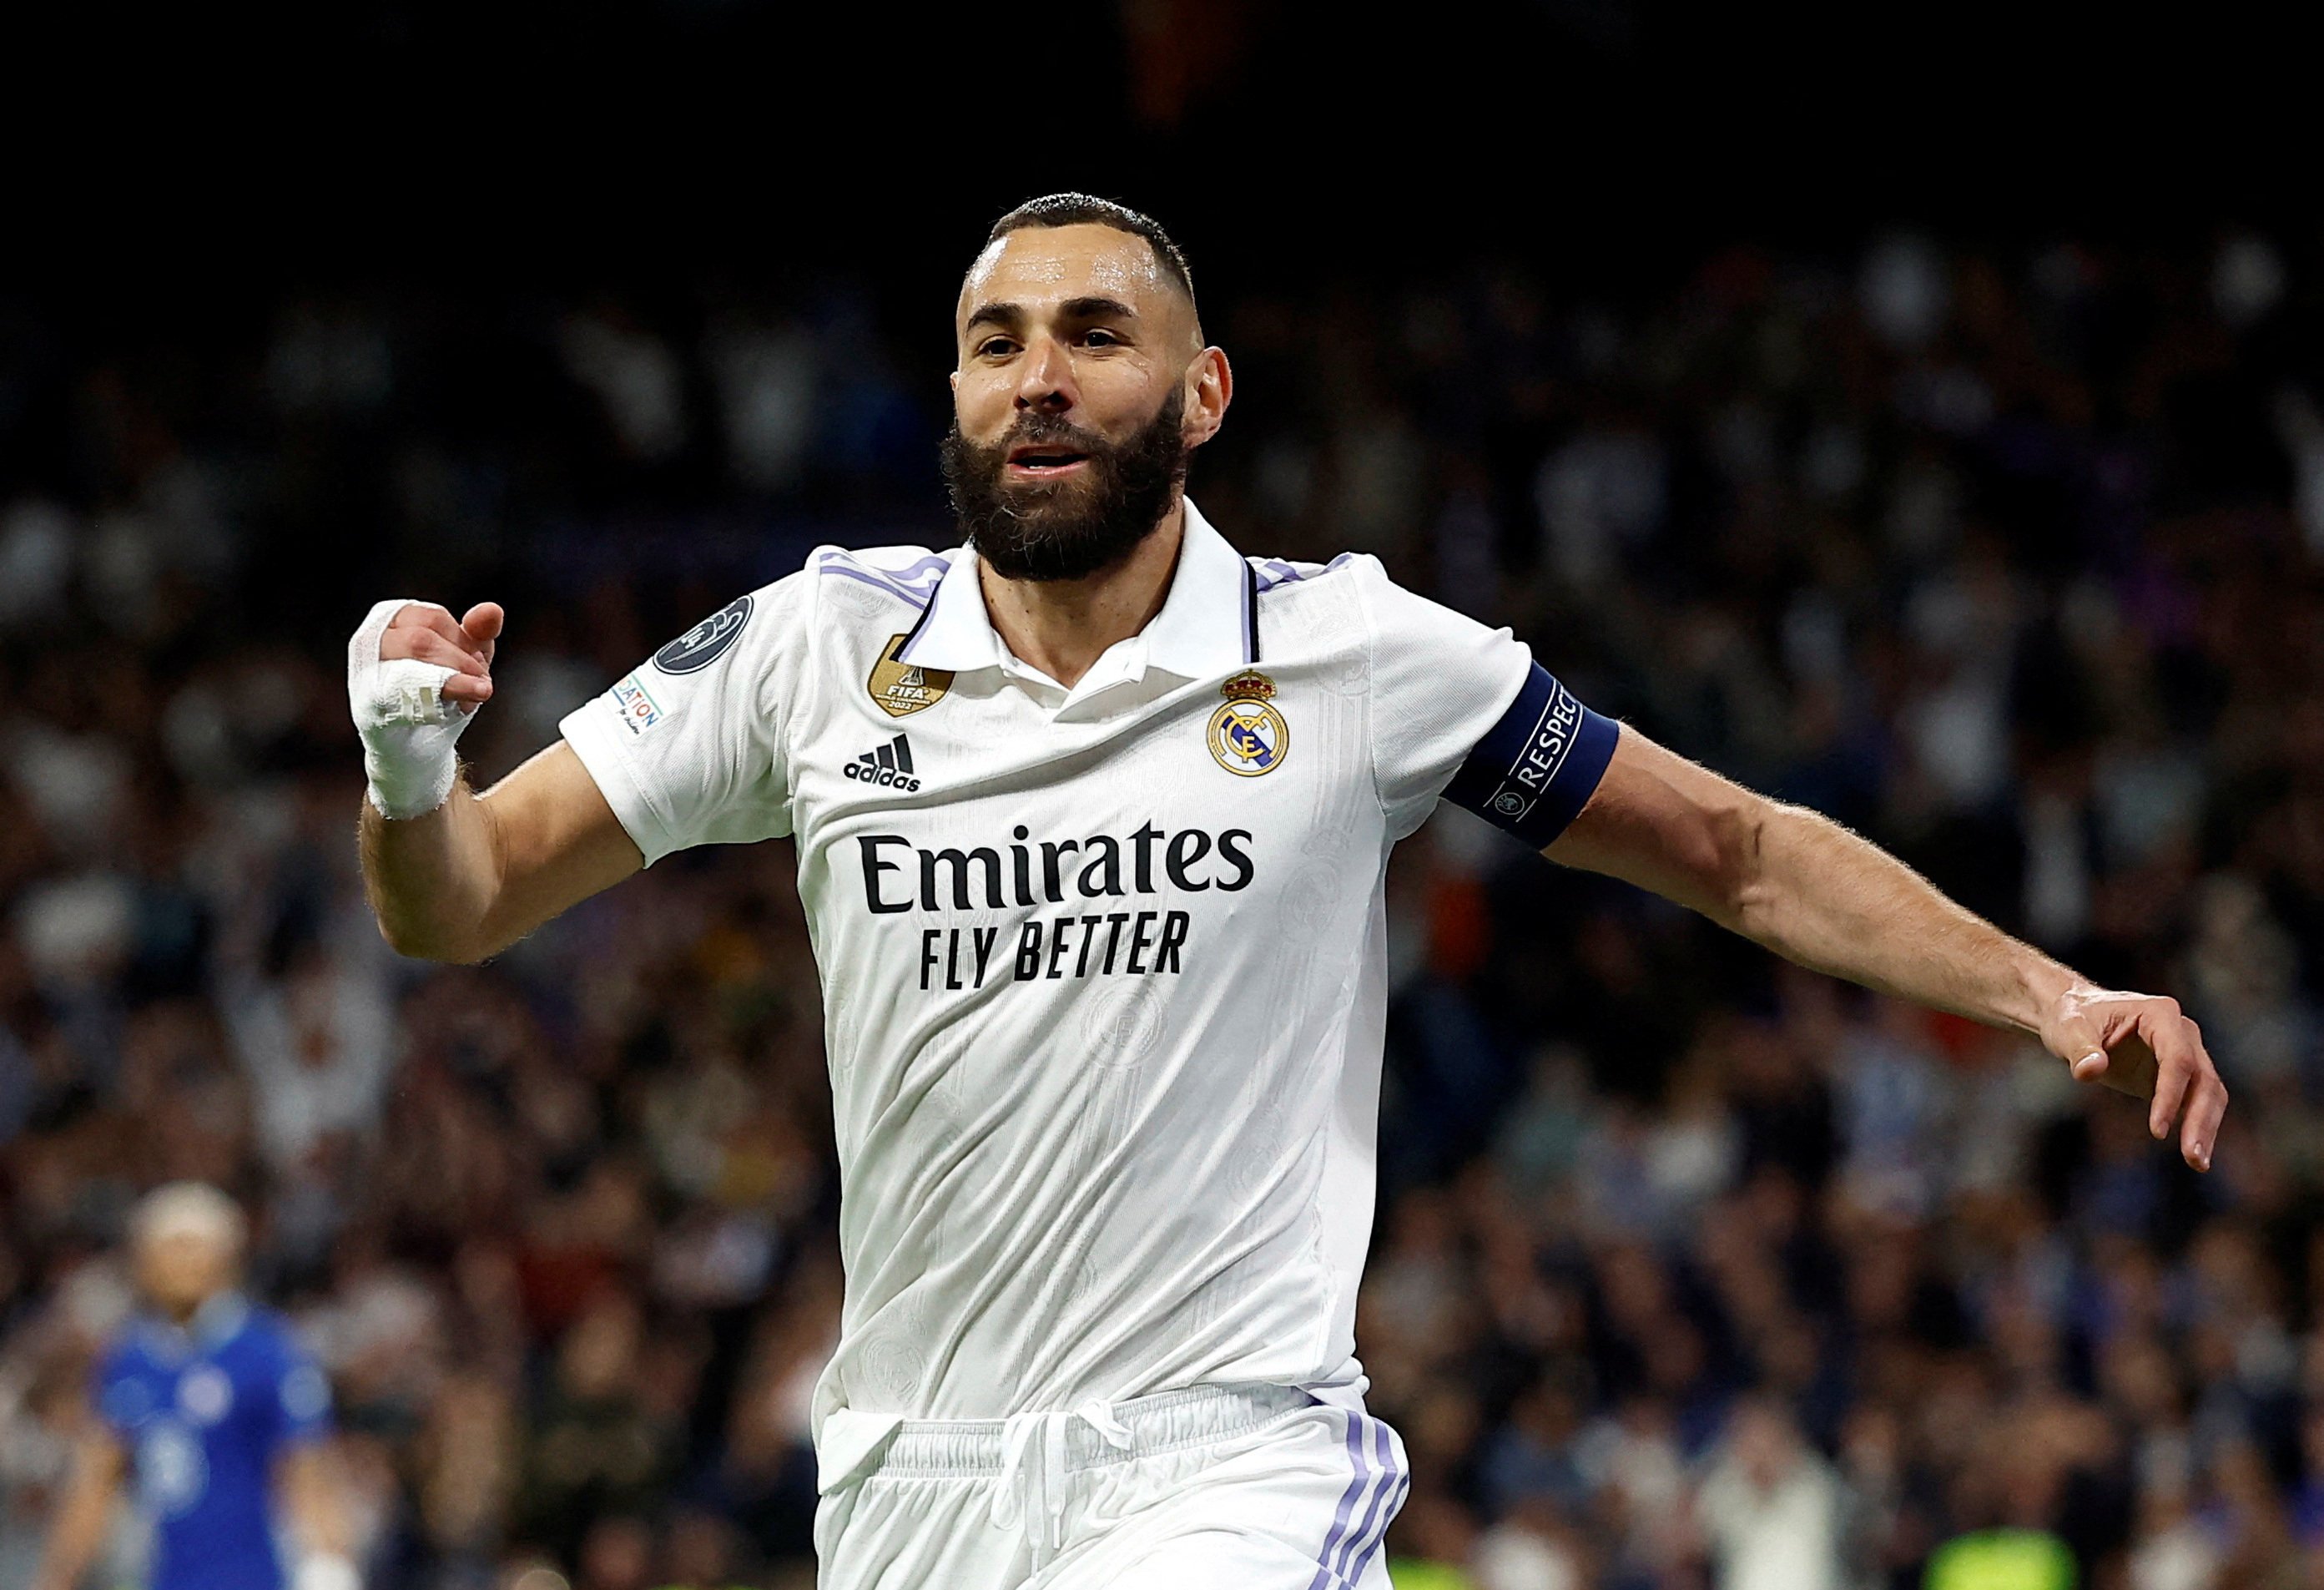 Real Madrid’s Karim Benzema is leaving the club after 14 years. Photo: Reuters